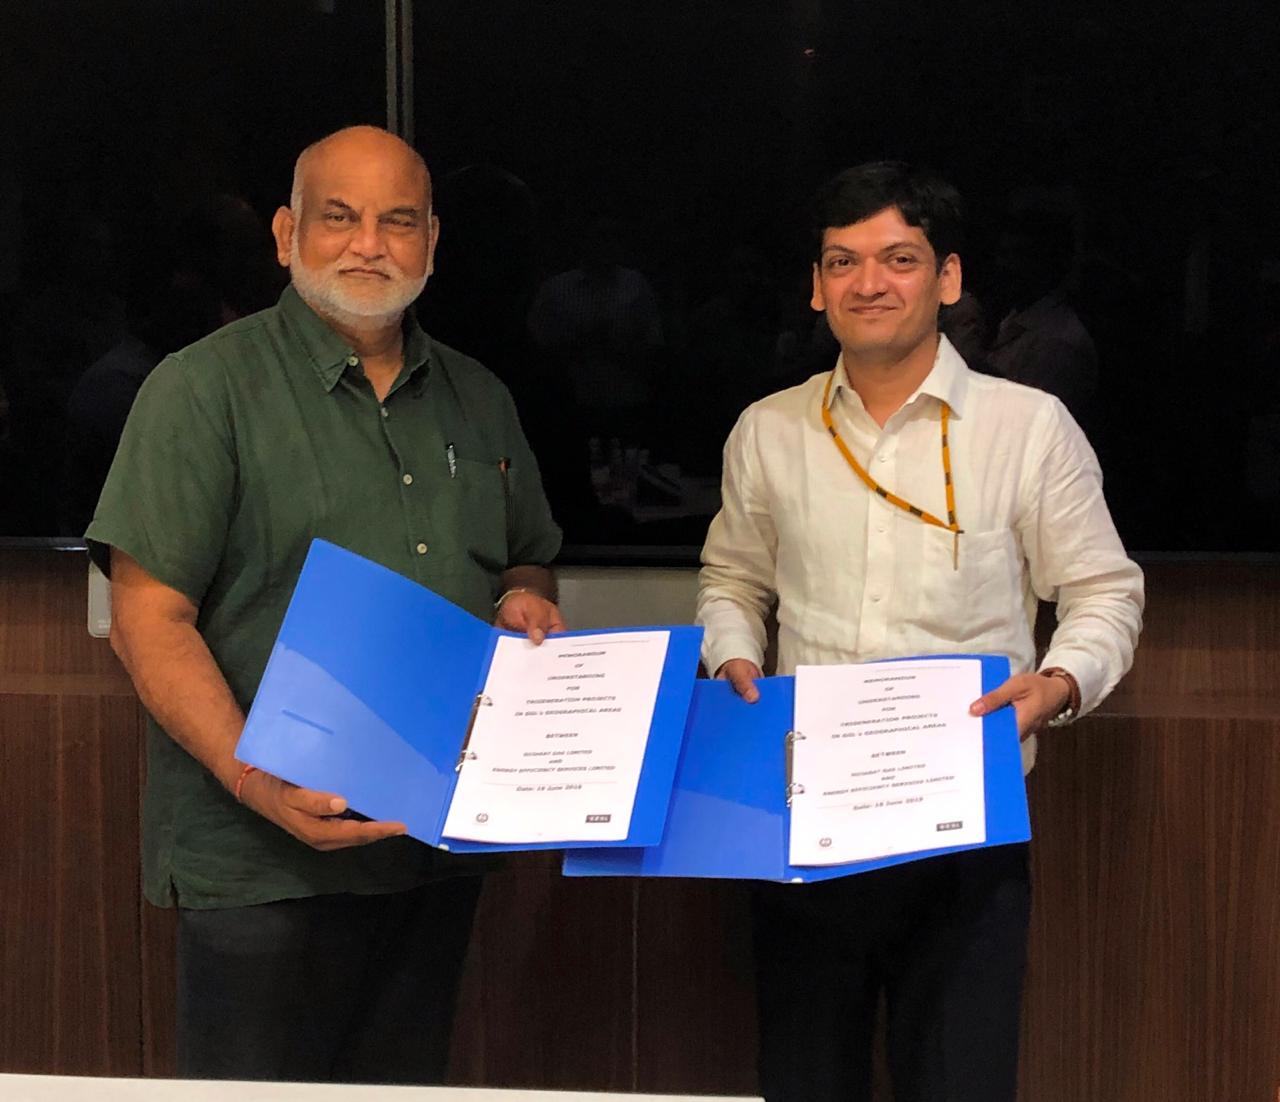 MoU signed to promote adoption of Tri-Generation Technology between Gujarat Gas Ltd. and Energy Efficiency Services Ltd